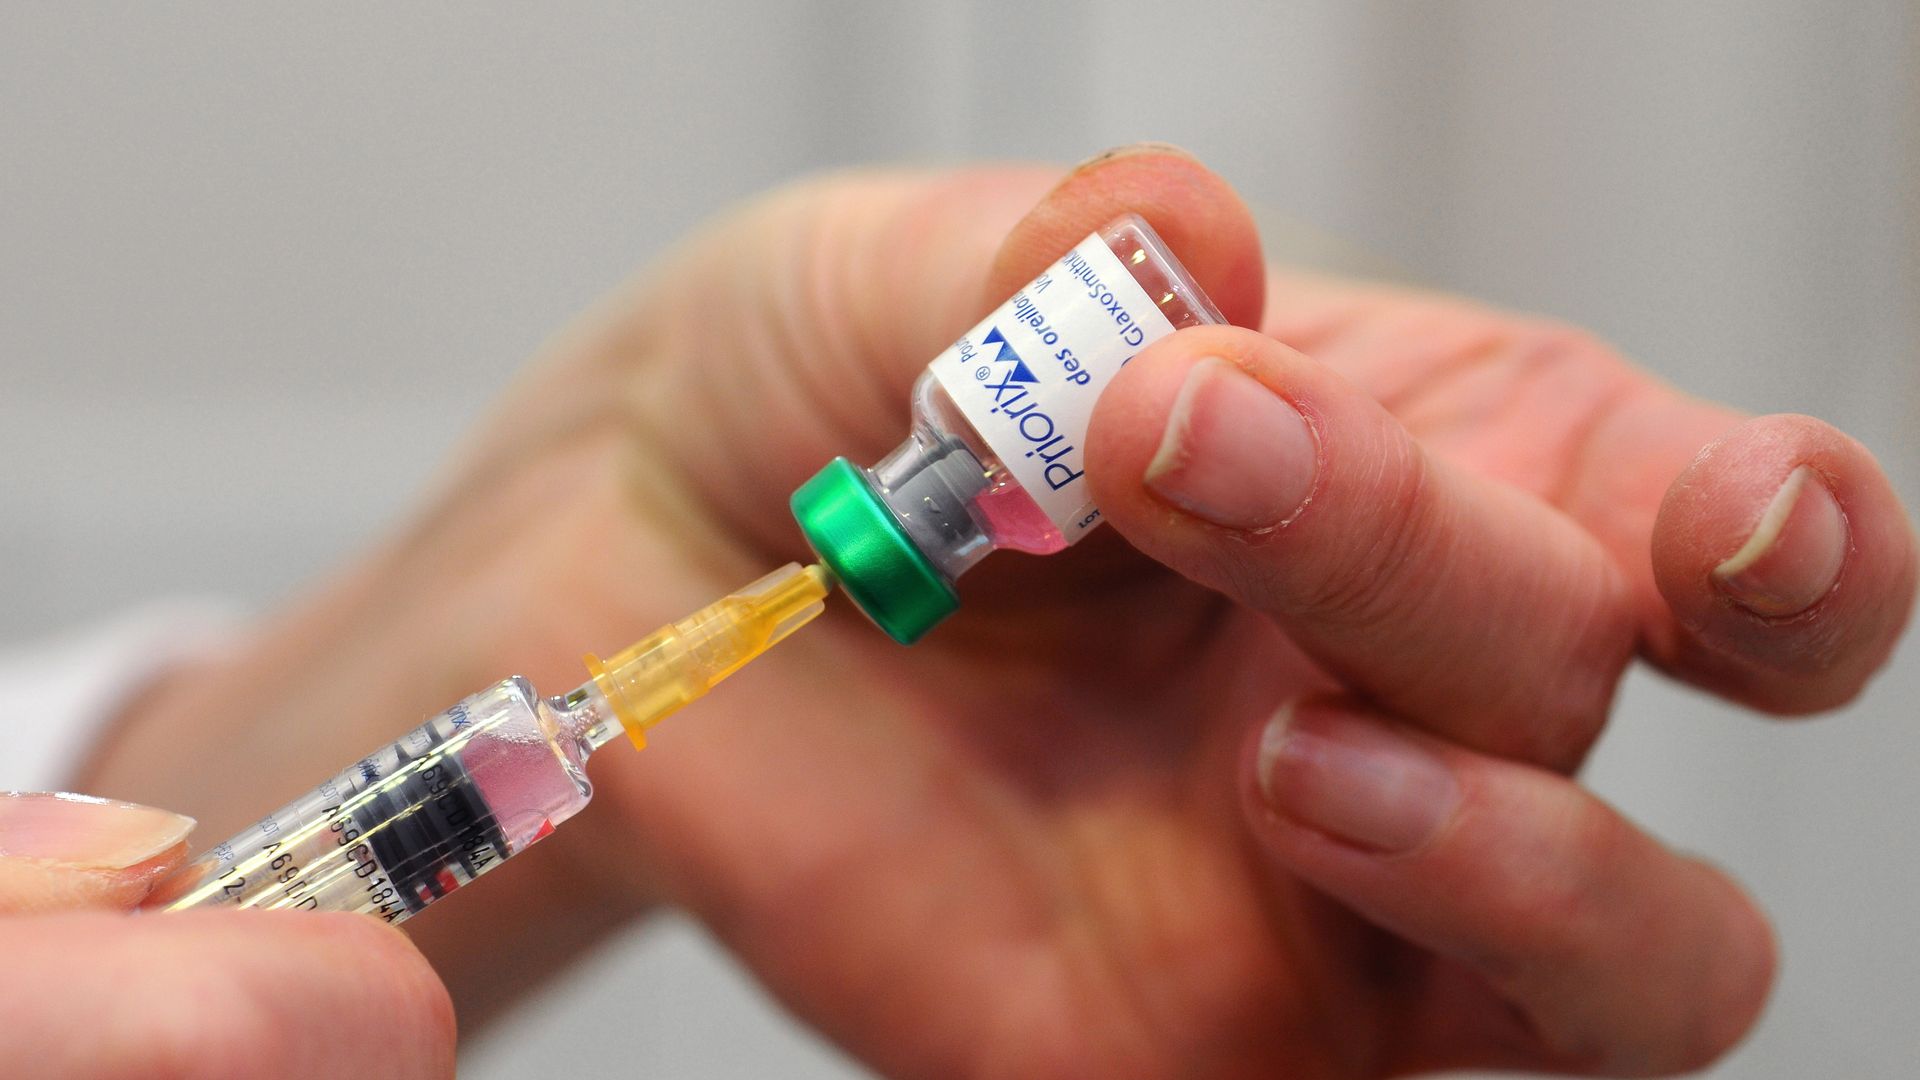  Priorix immunises against measles, mumps and rubella. (Photo by: BSIP/Universal Images Group via Getty Images)